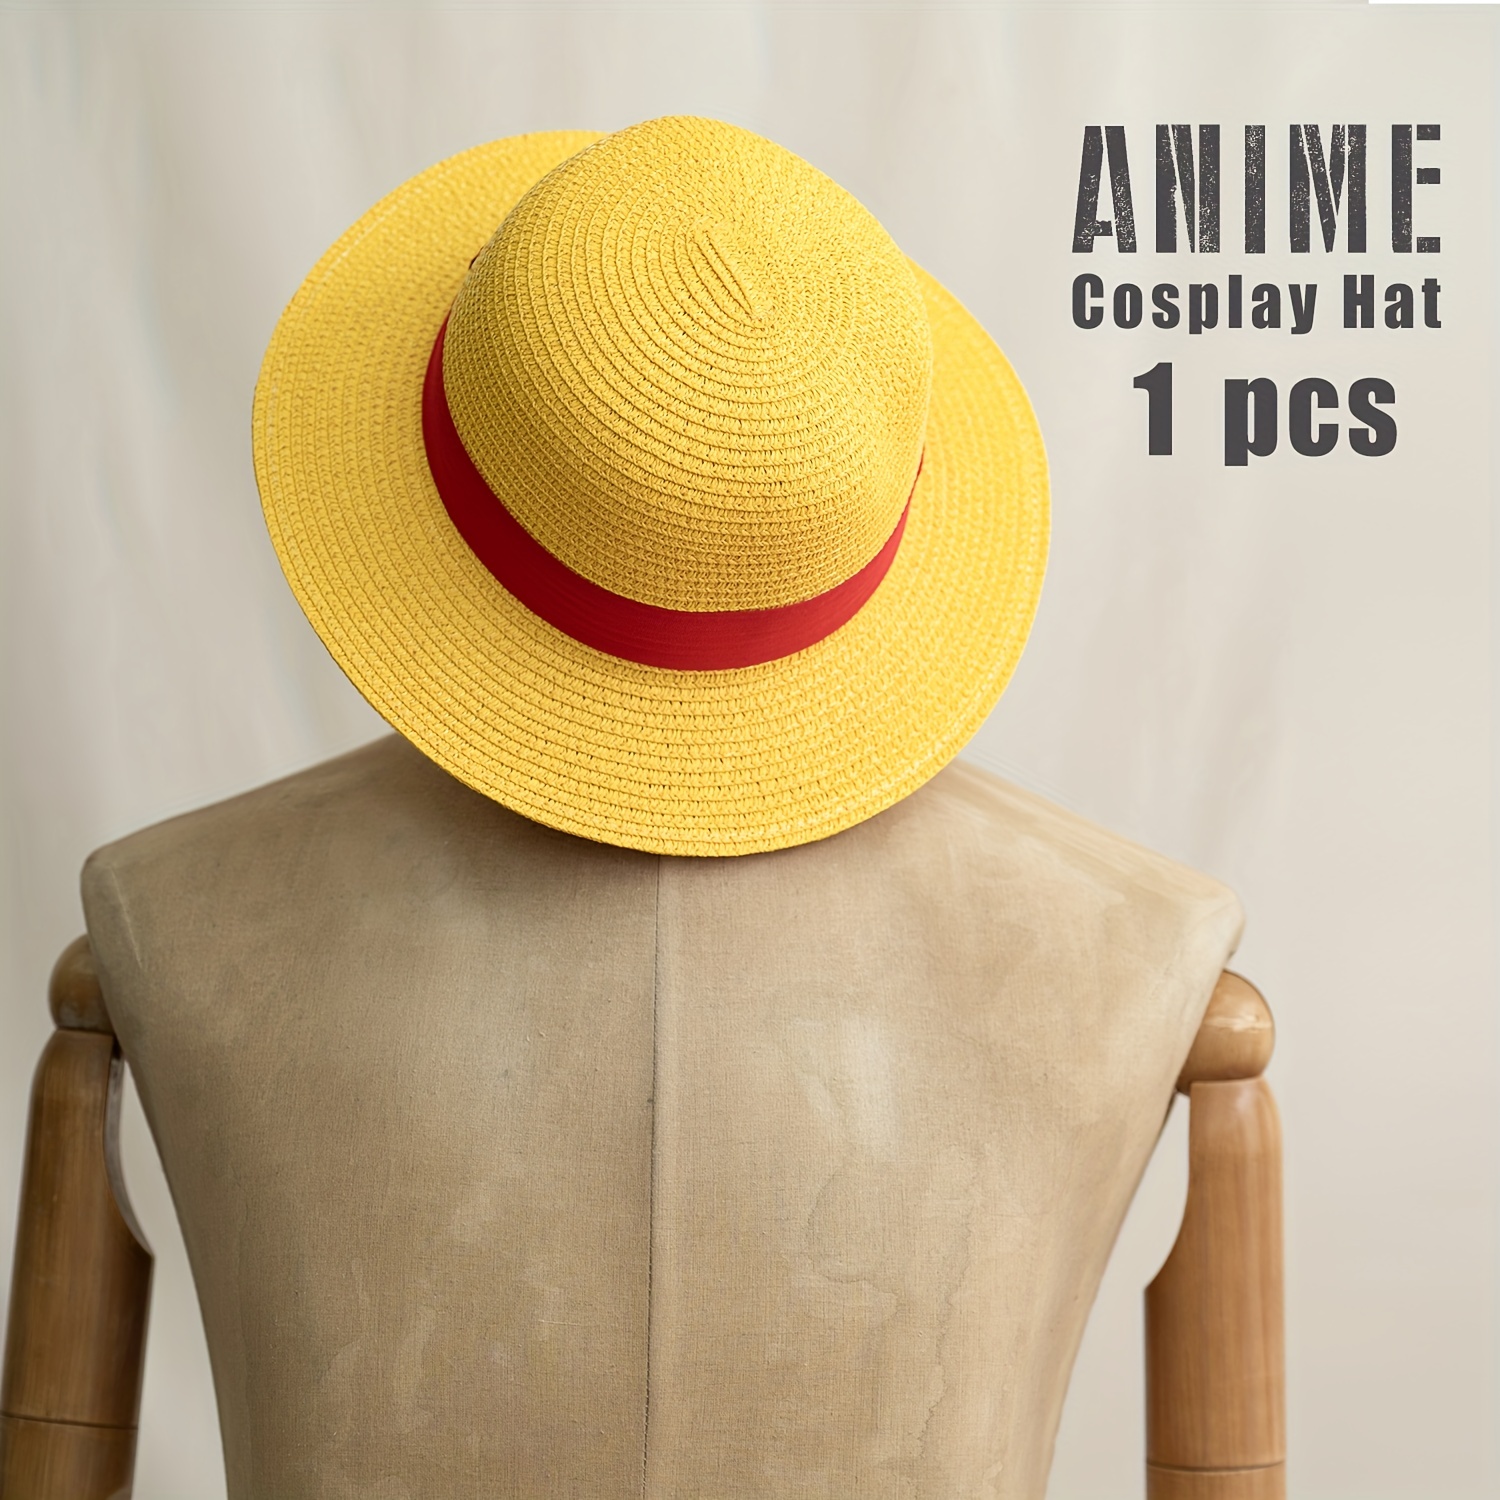 Anime ONE PIECE Monkey·D·Luffy Cosplay Costume Party Christmas